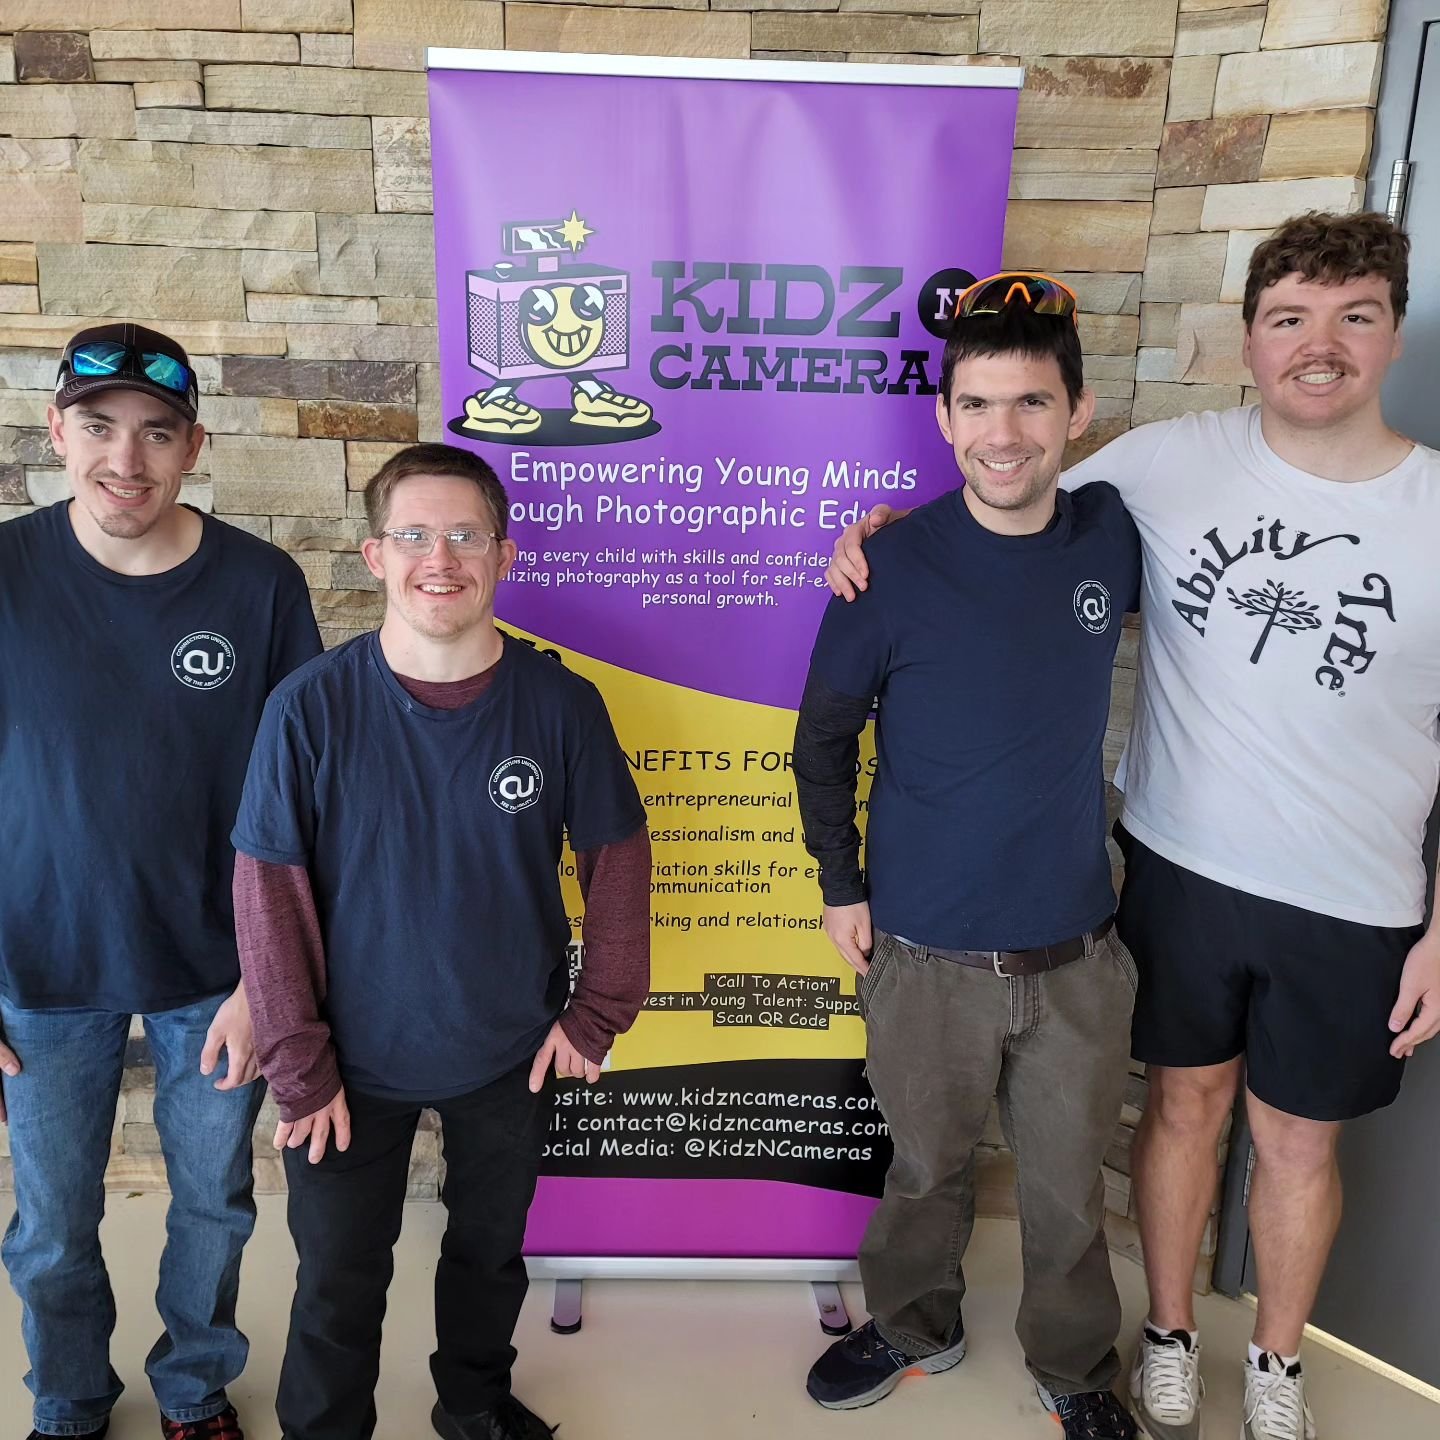 Support us by donating to Kidz N Cameras through the link in our bio, via Linktree for NWA Gives. Your generosity fuels our mission. Donation can help us create more programs like the one we envision with the wonderful kids we met today from Ability 